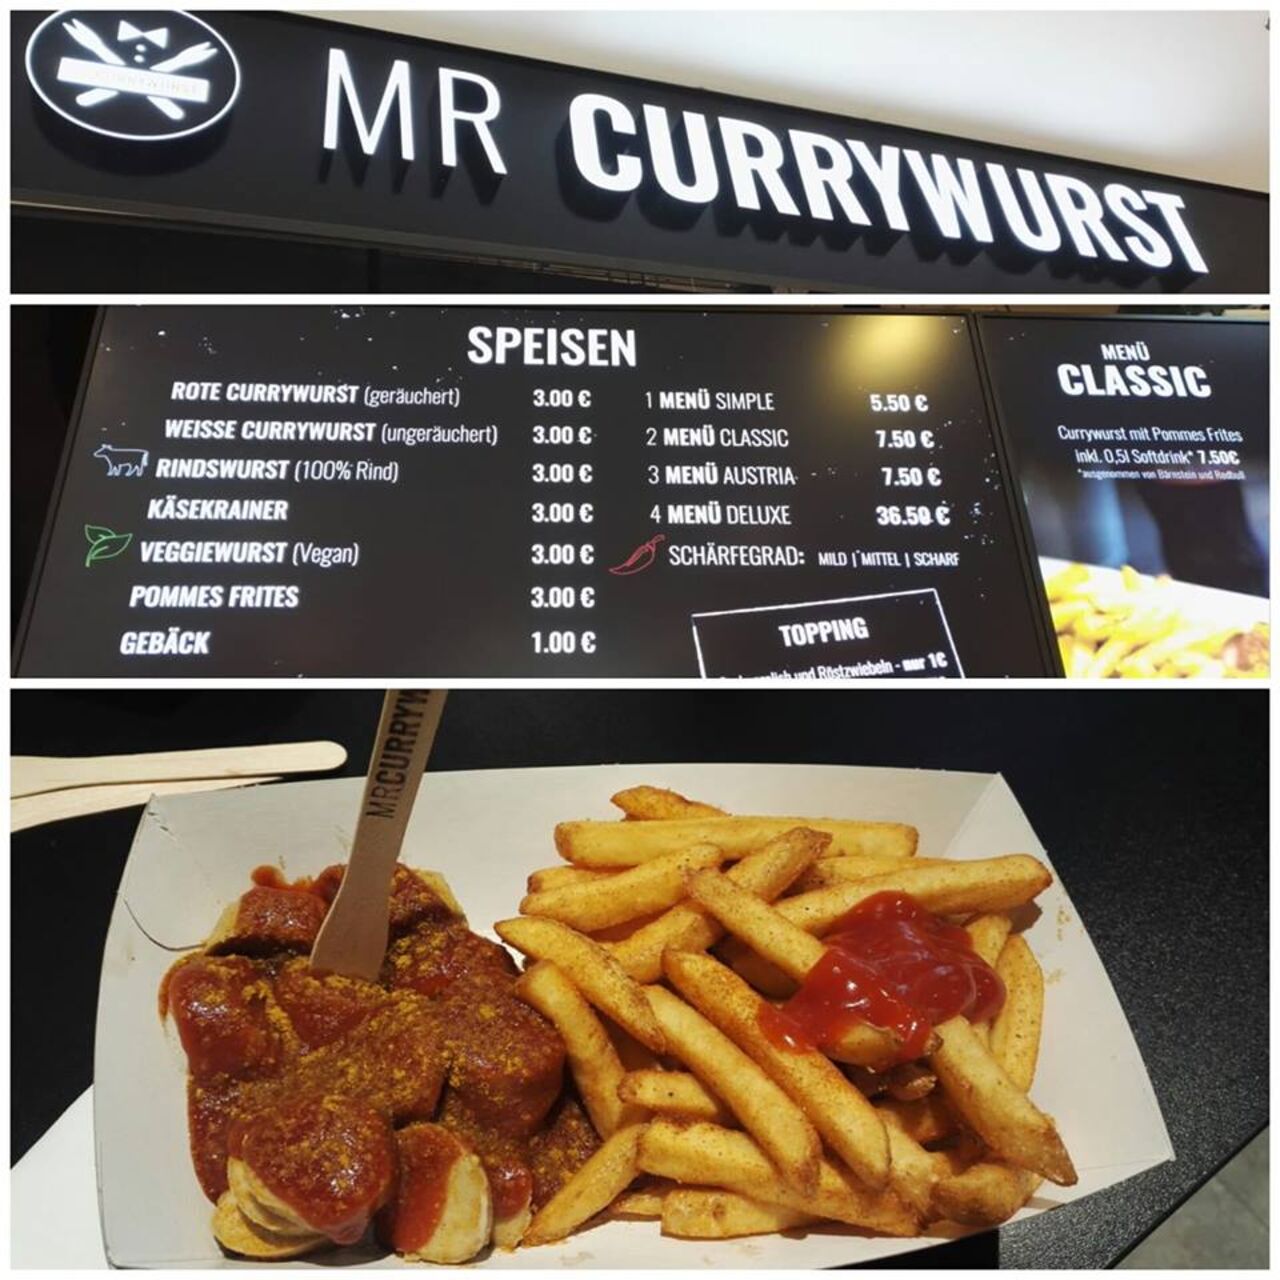 A photo of Mr Currywurst